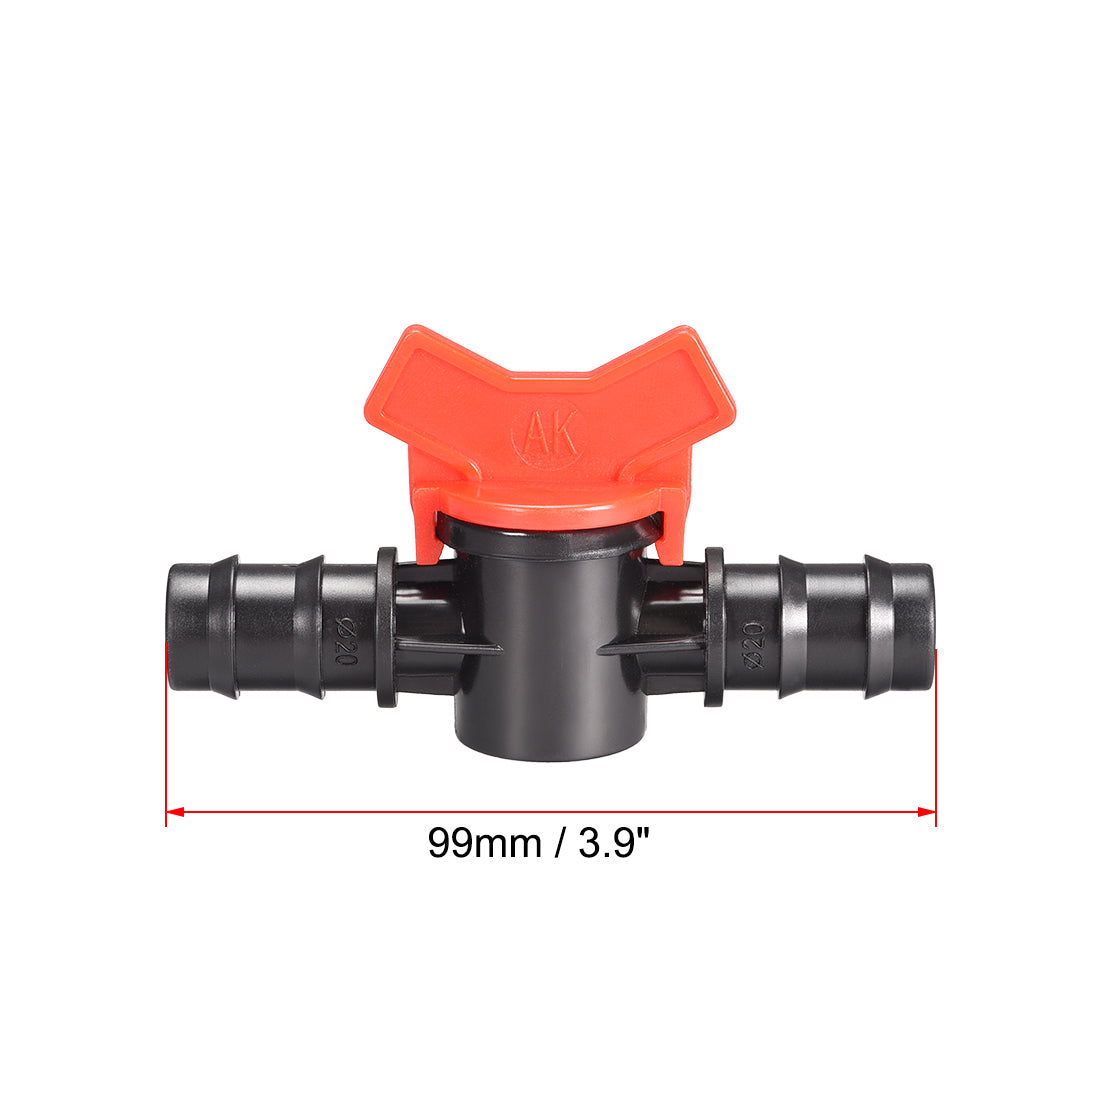 uxcell Uxcell Drip Irrigation Barbed Valve  for 5/8 Inch Double Male Barbed Valve Aquarium Water Flow Control Plastic Valve 2pcs